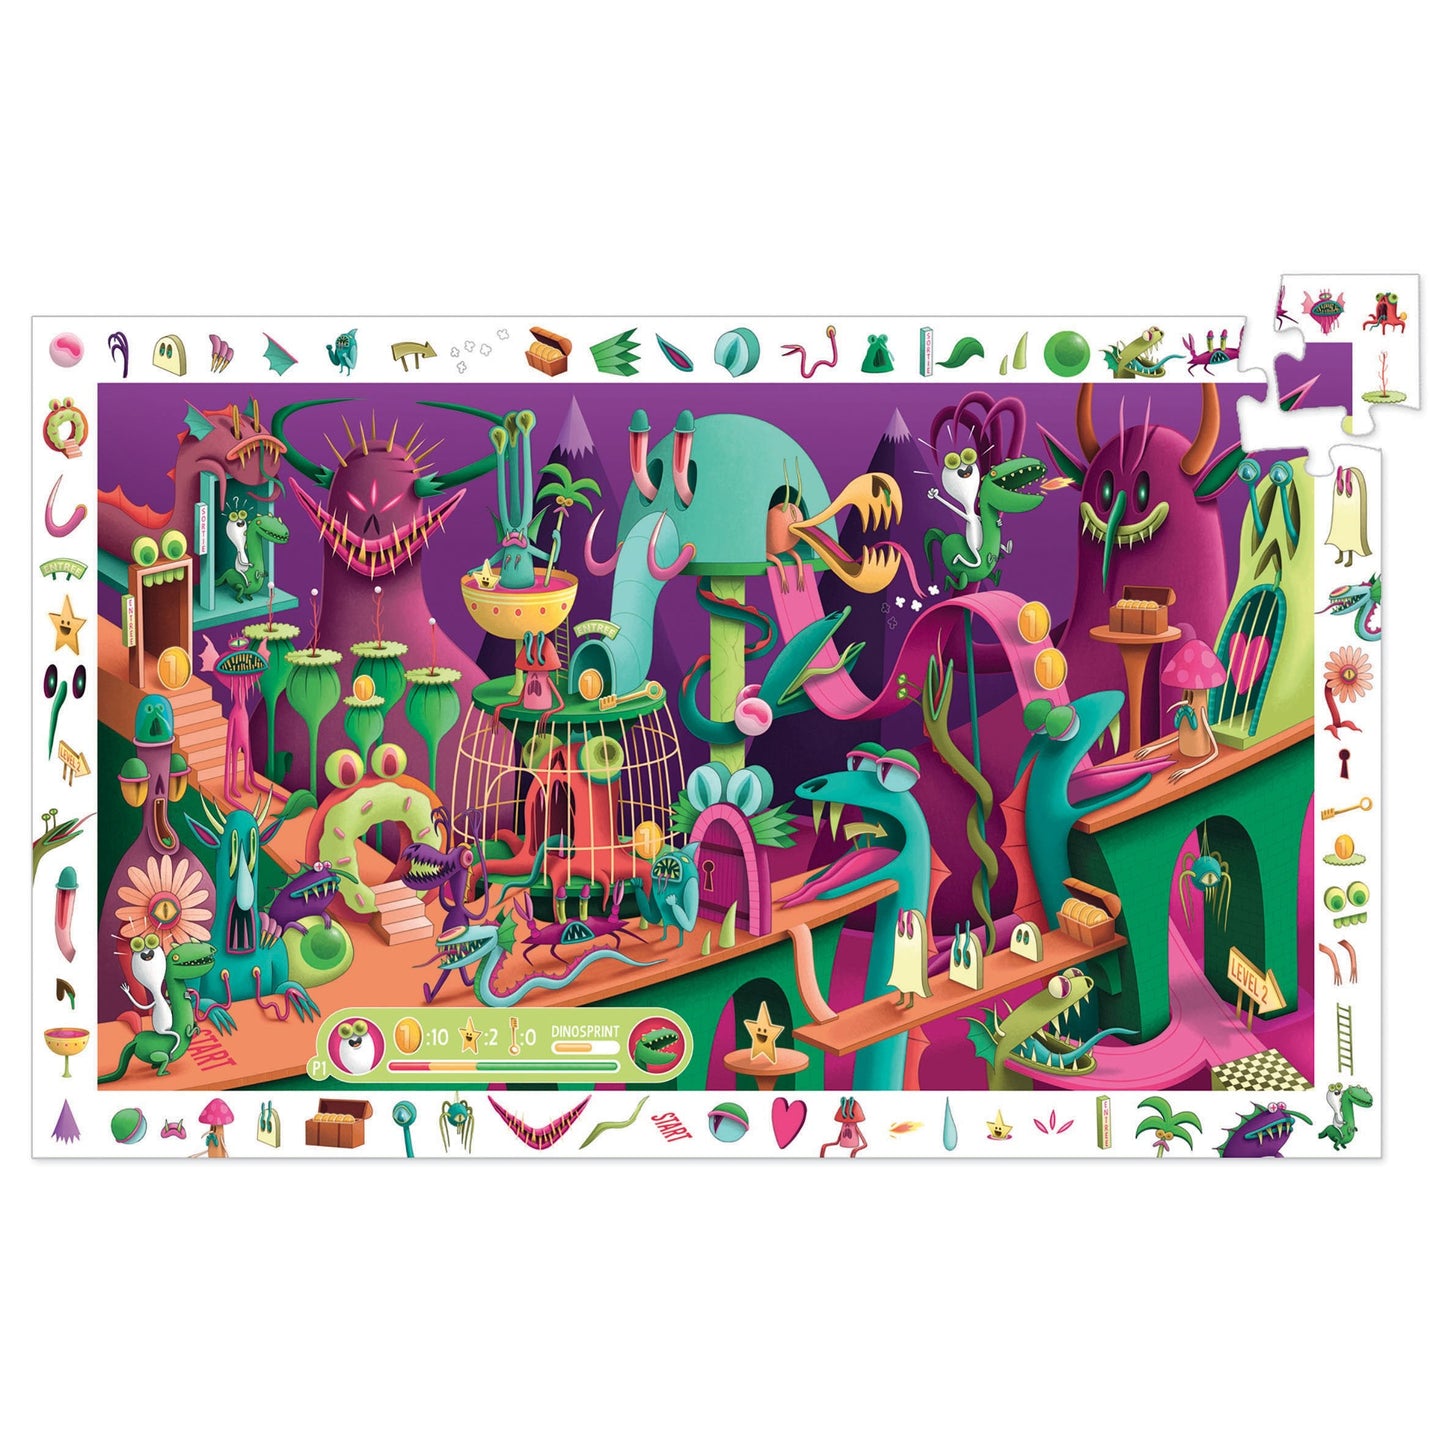 Djeco In a Video Game 200pc Observation Jigsaw Puzzle + Poster